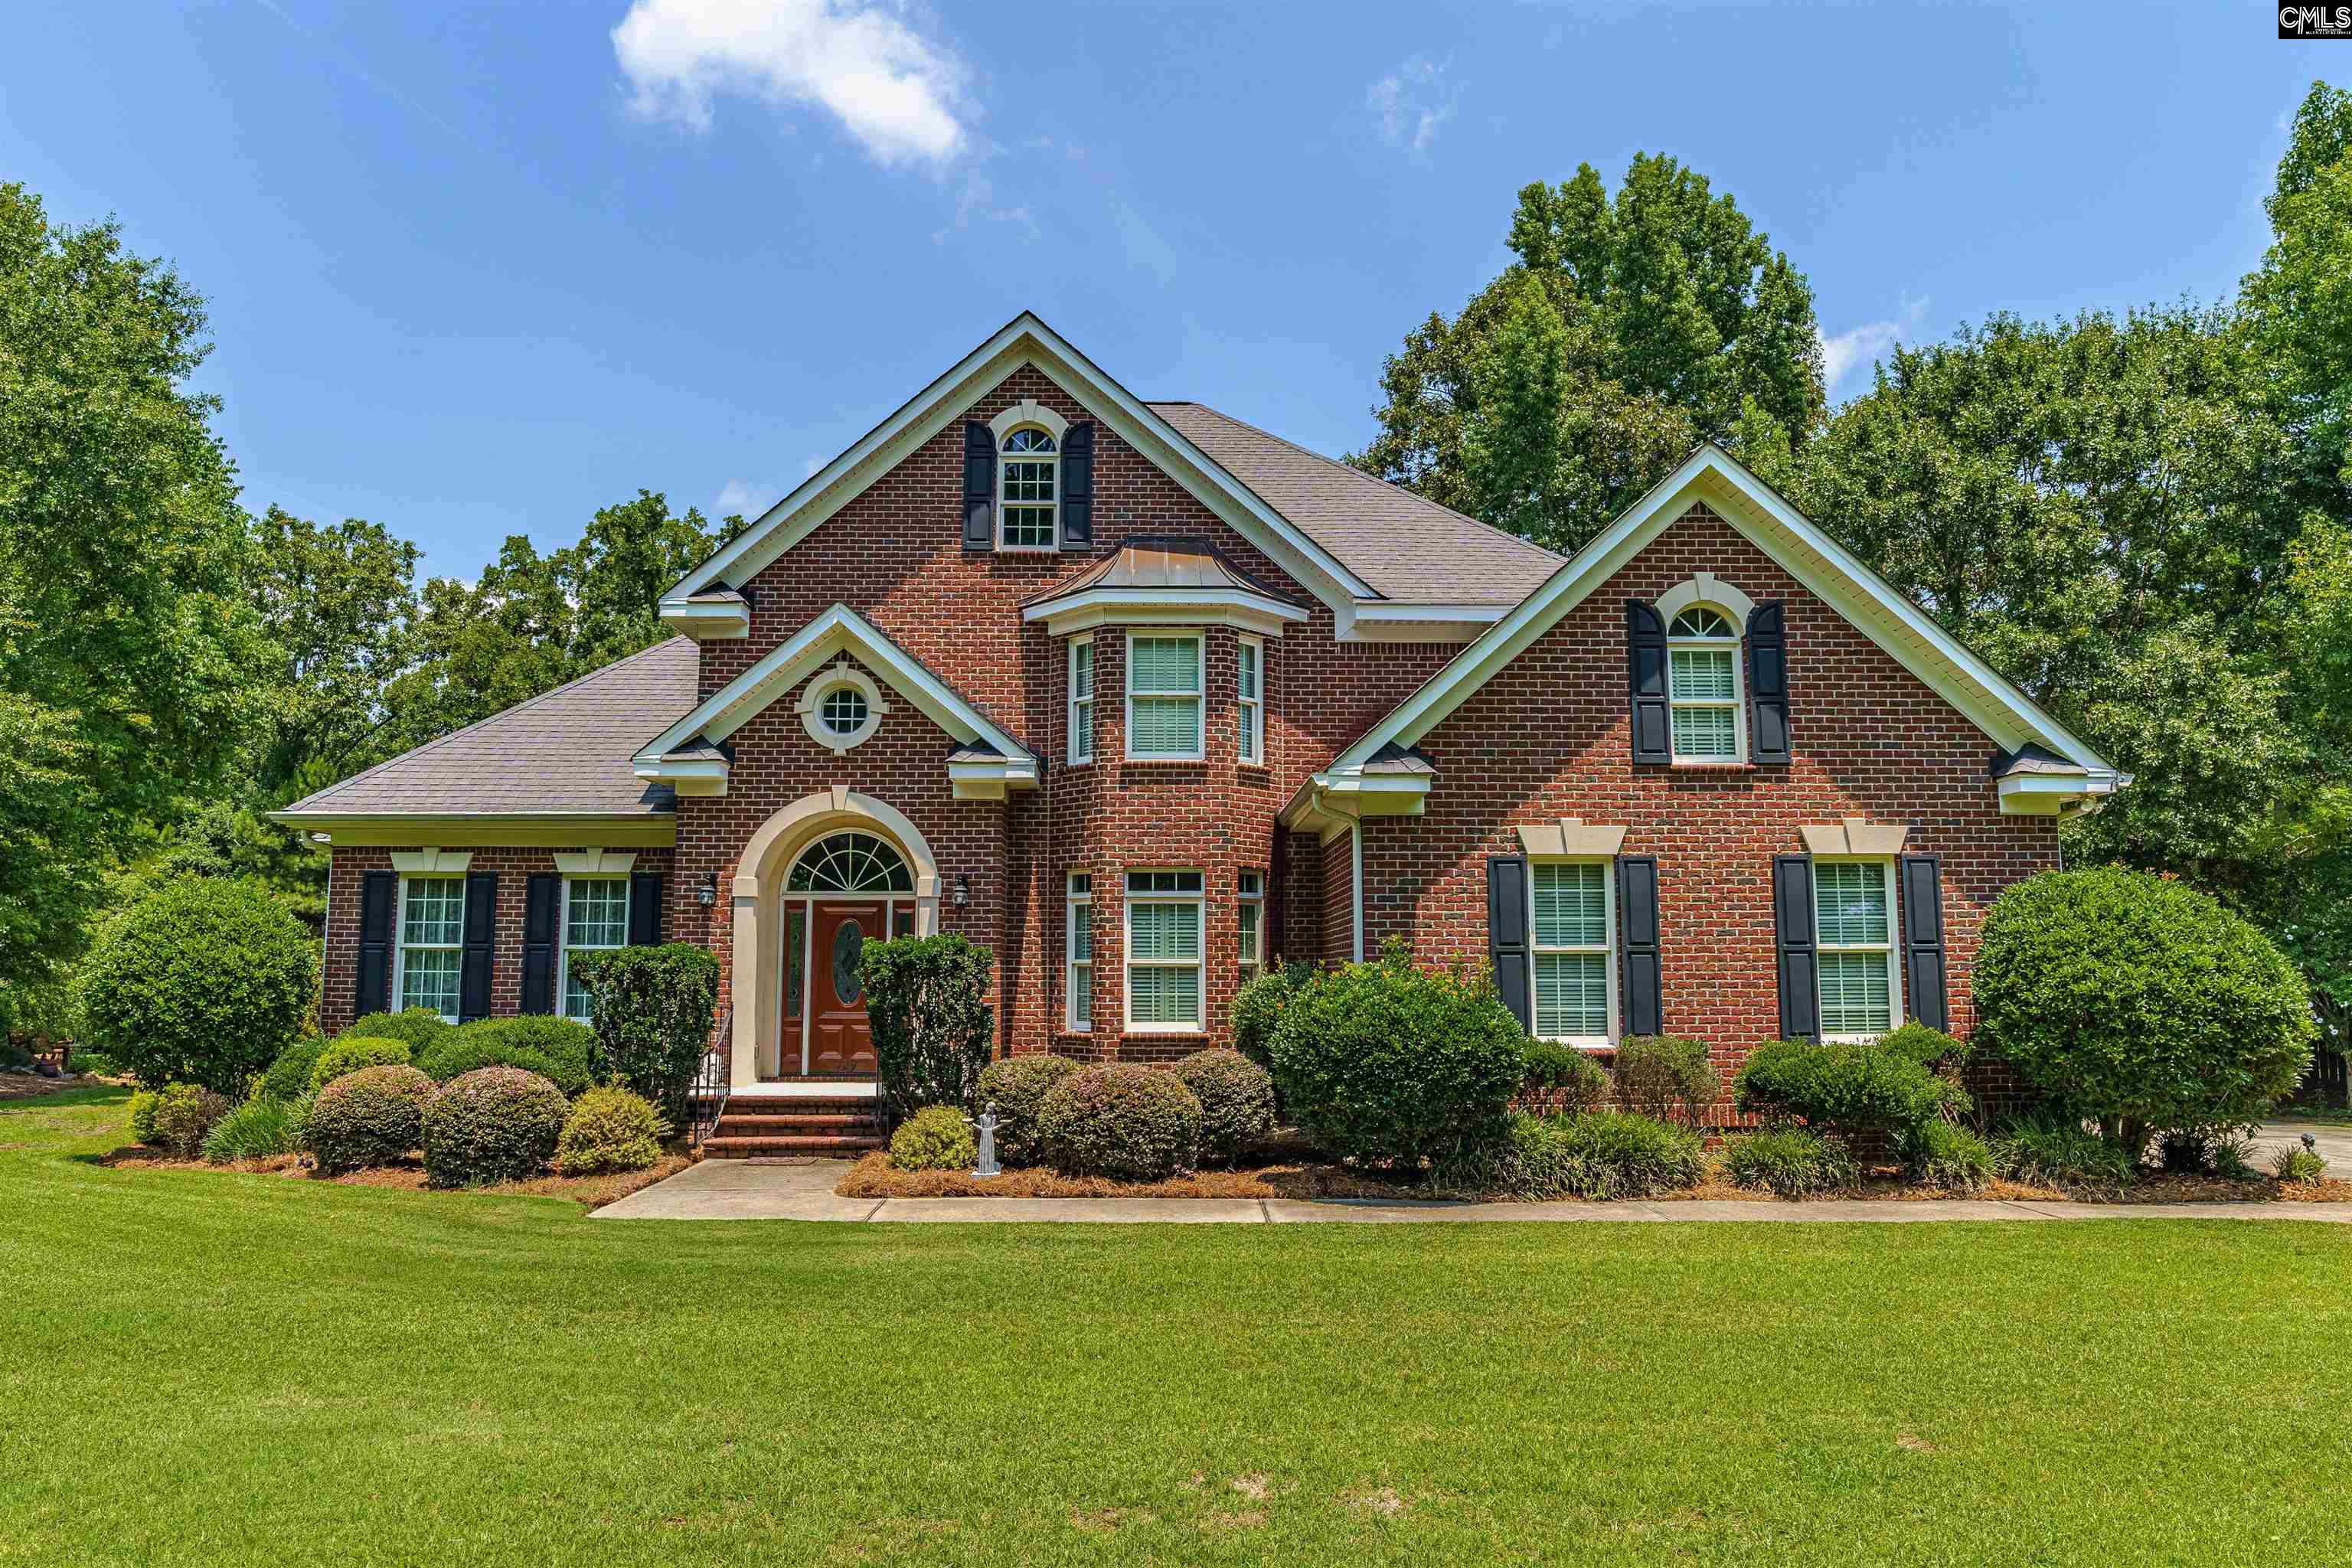 129 Silver Wing West Columbia, SC 29169-6264